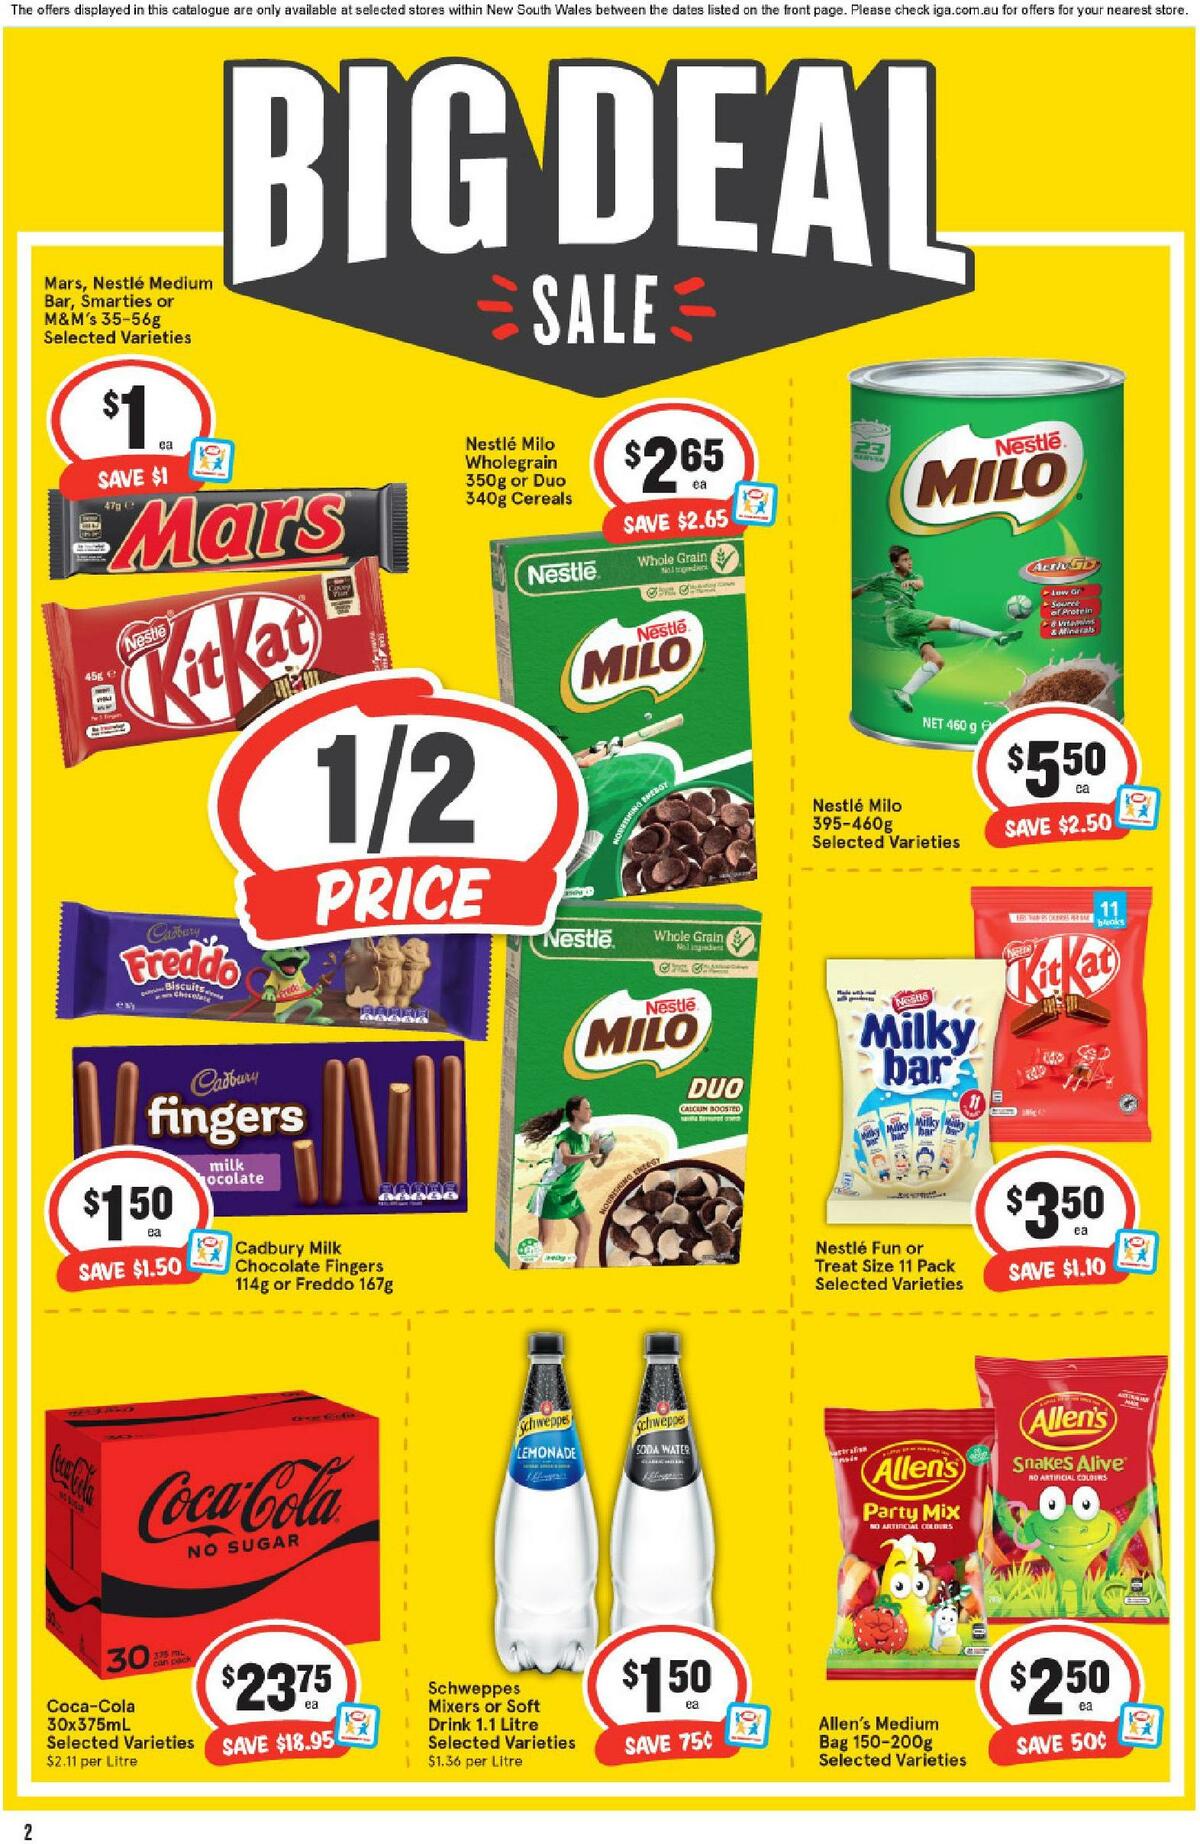 IGA Catalogues from 2 March